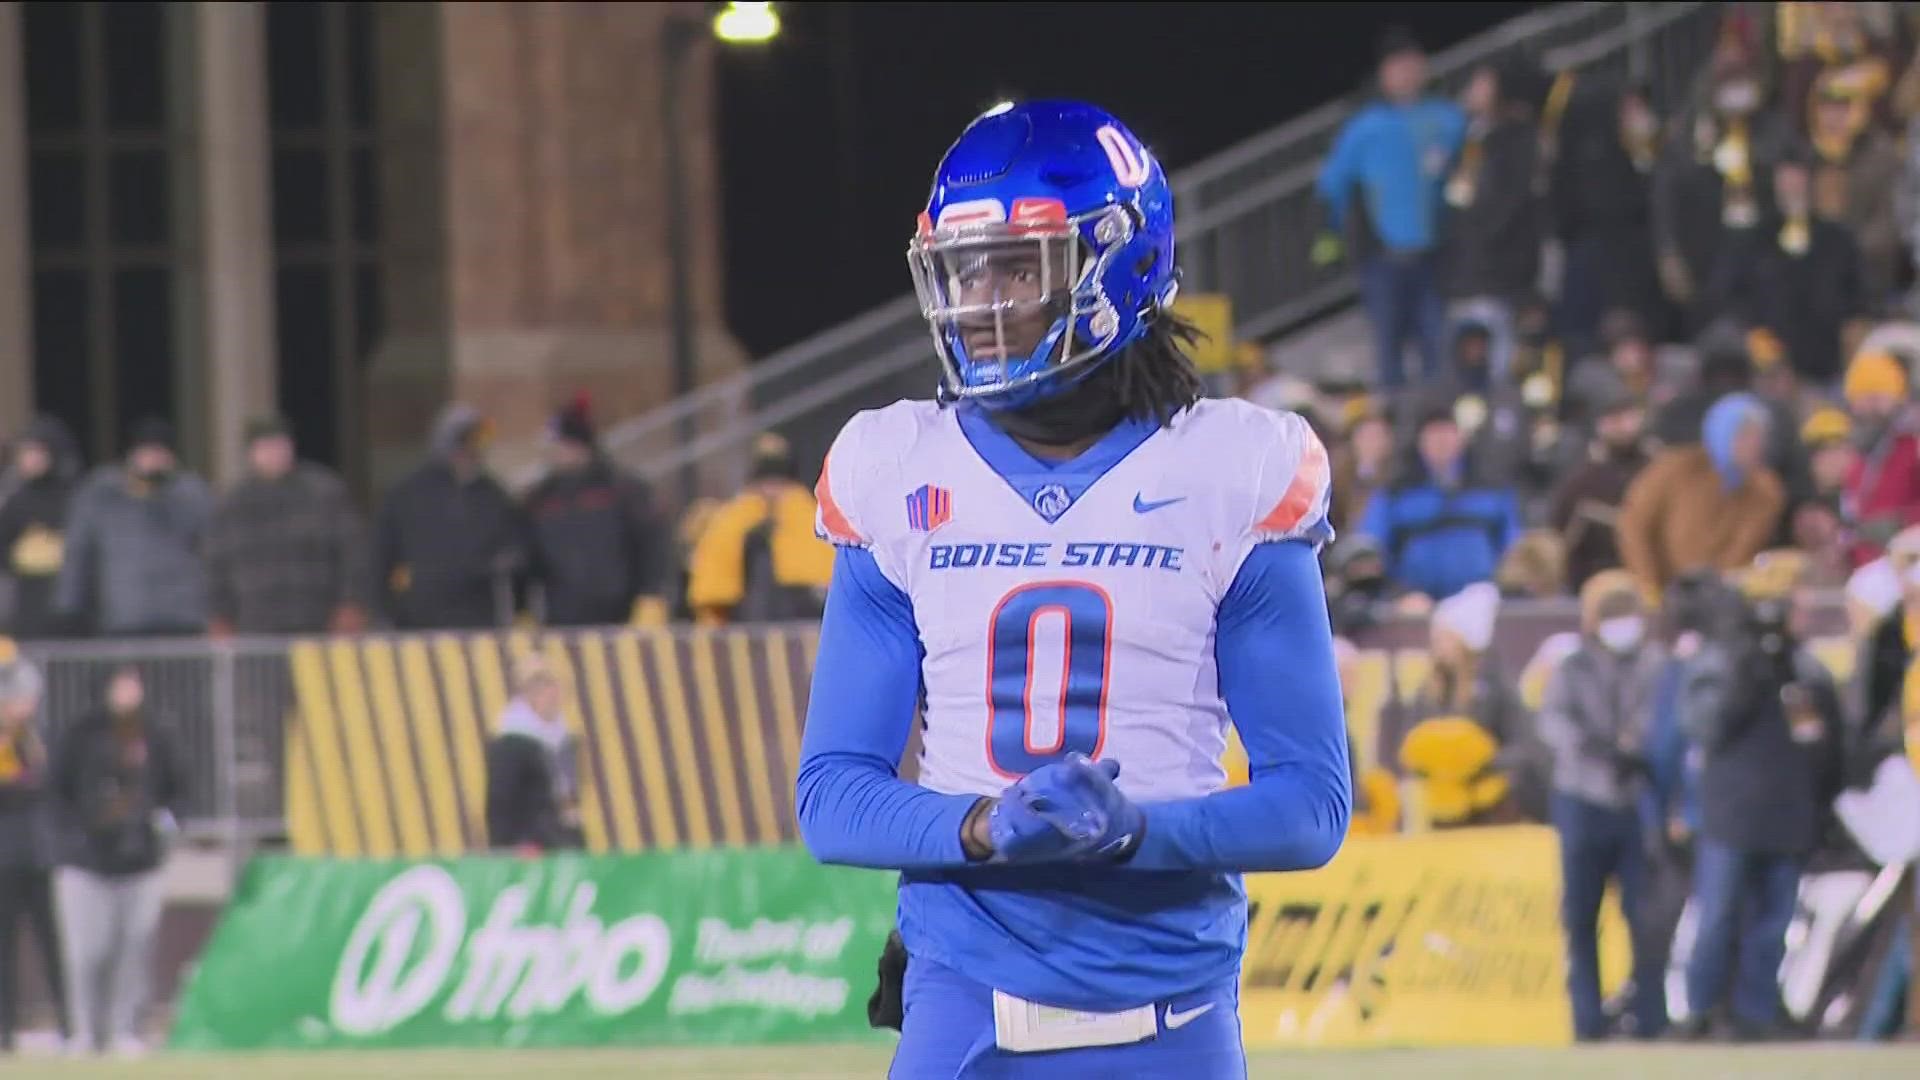 Boise State standout safety JL Skinner did not play in the Reese's Senior Bowl on Saturday after his aunt passed away this week. Skinner went home to support family.